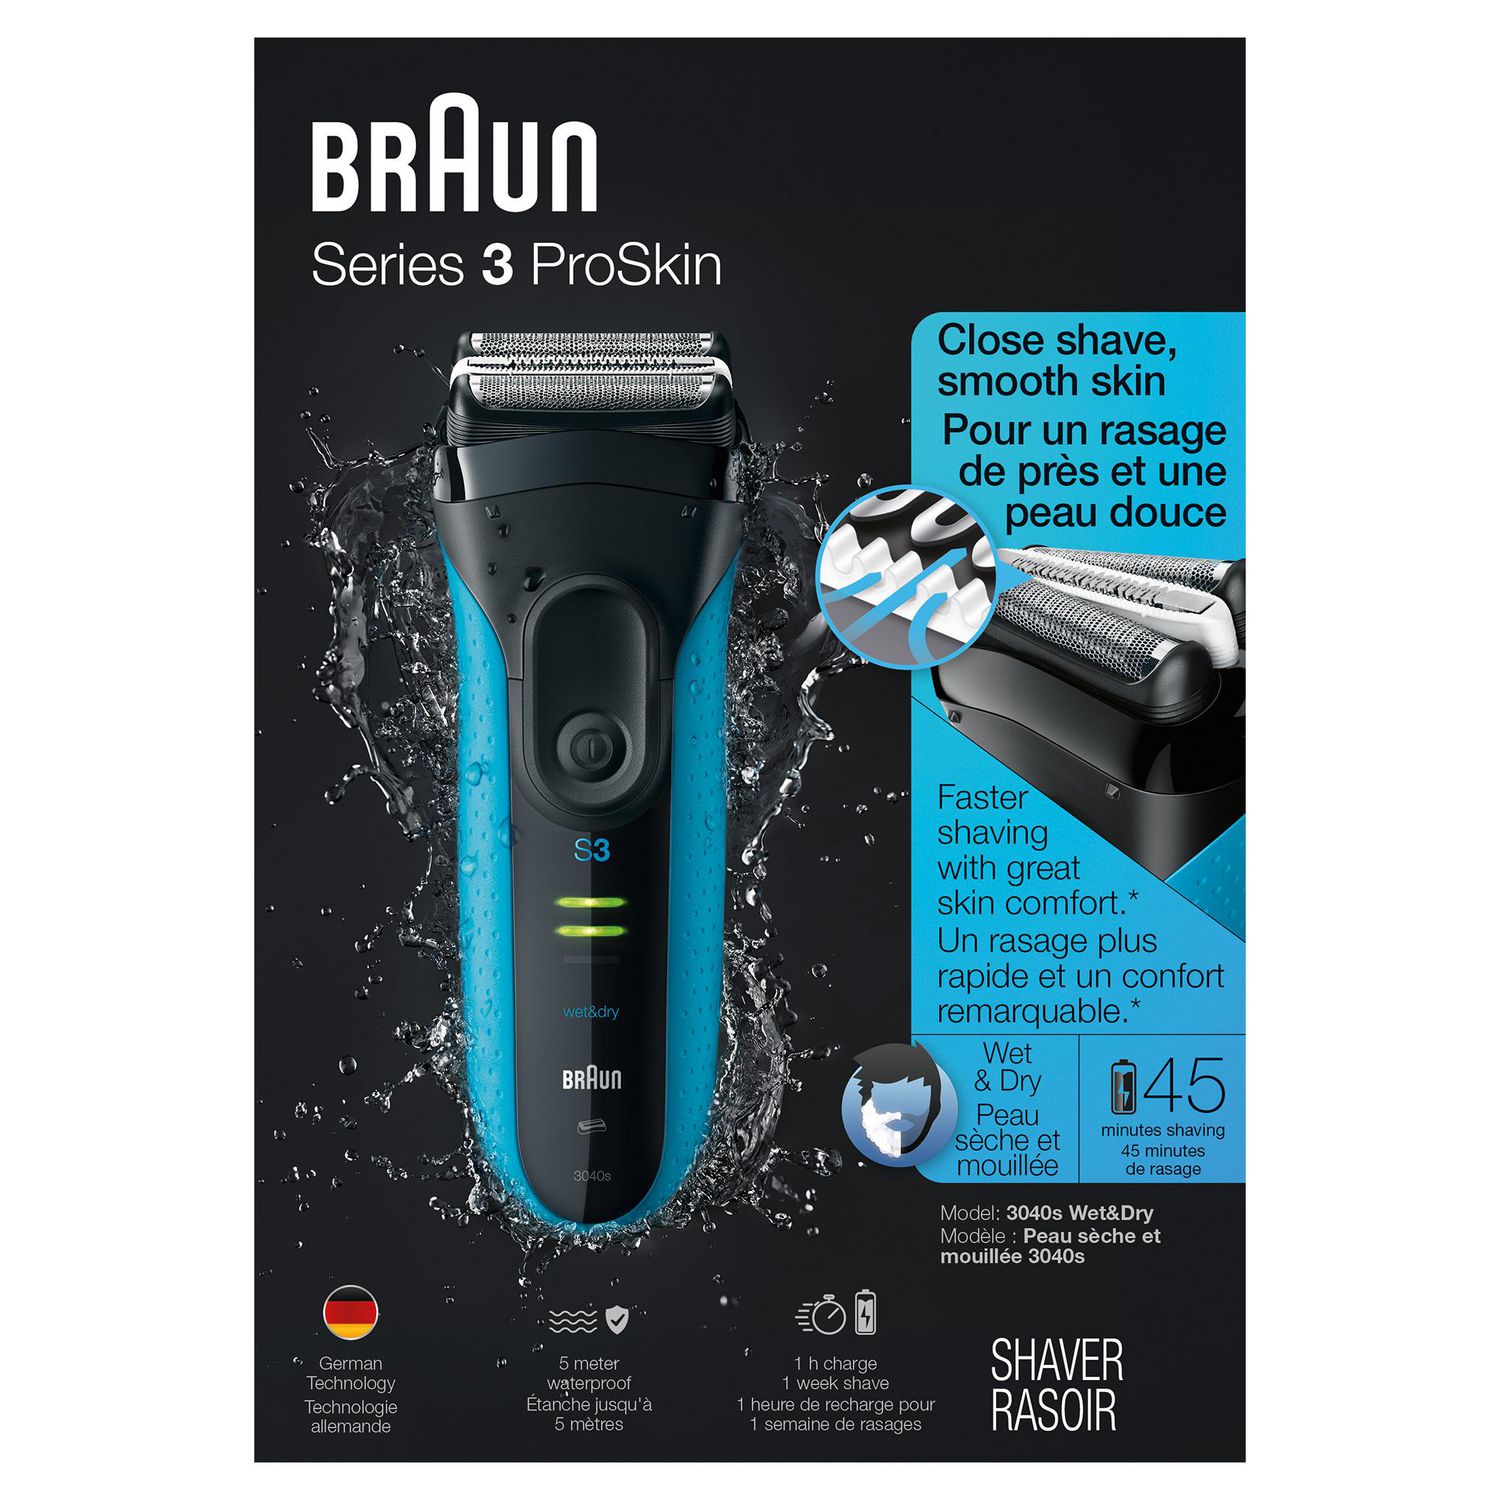 Braun Series 3 Proskin Dry Wet for Electric and Razor Set Black/Blue, Shave&Style 3-in-1 1 Men, Shaver